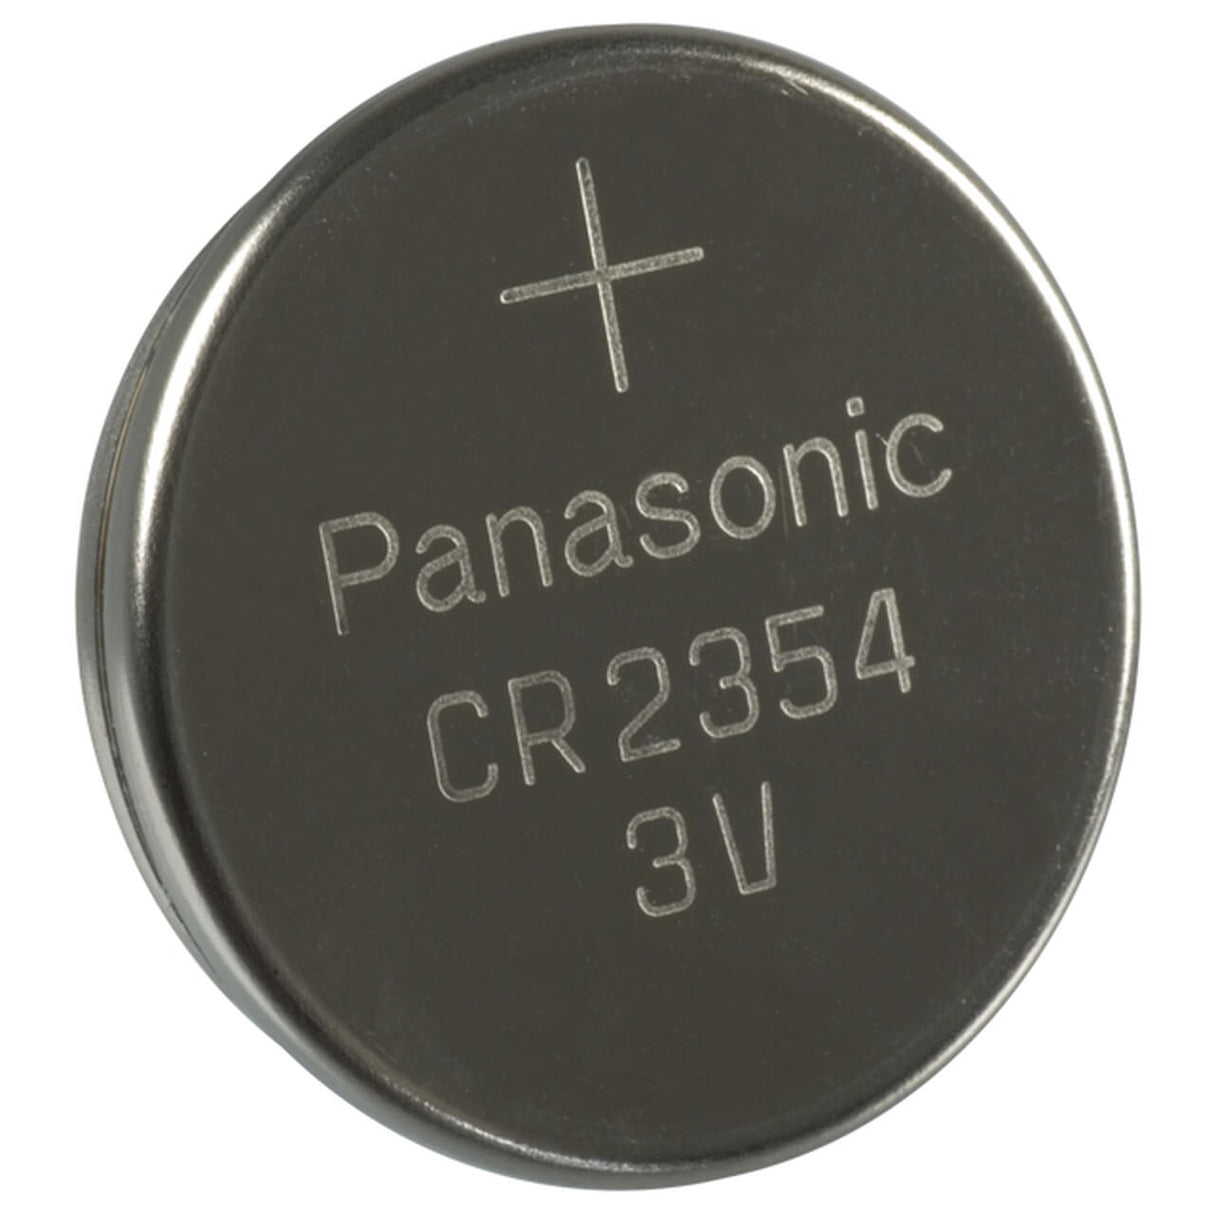 Cr2354 3 Volt Lithium Battery Replacement Battery By Use Panasonic   